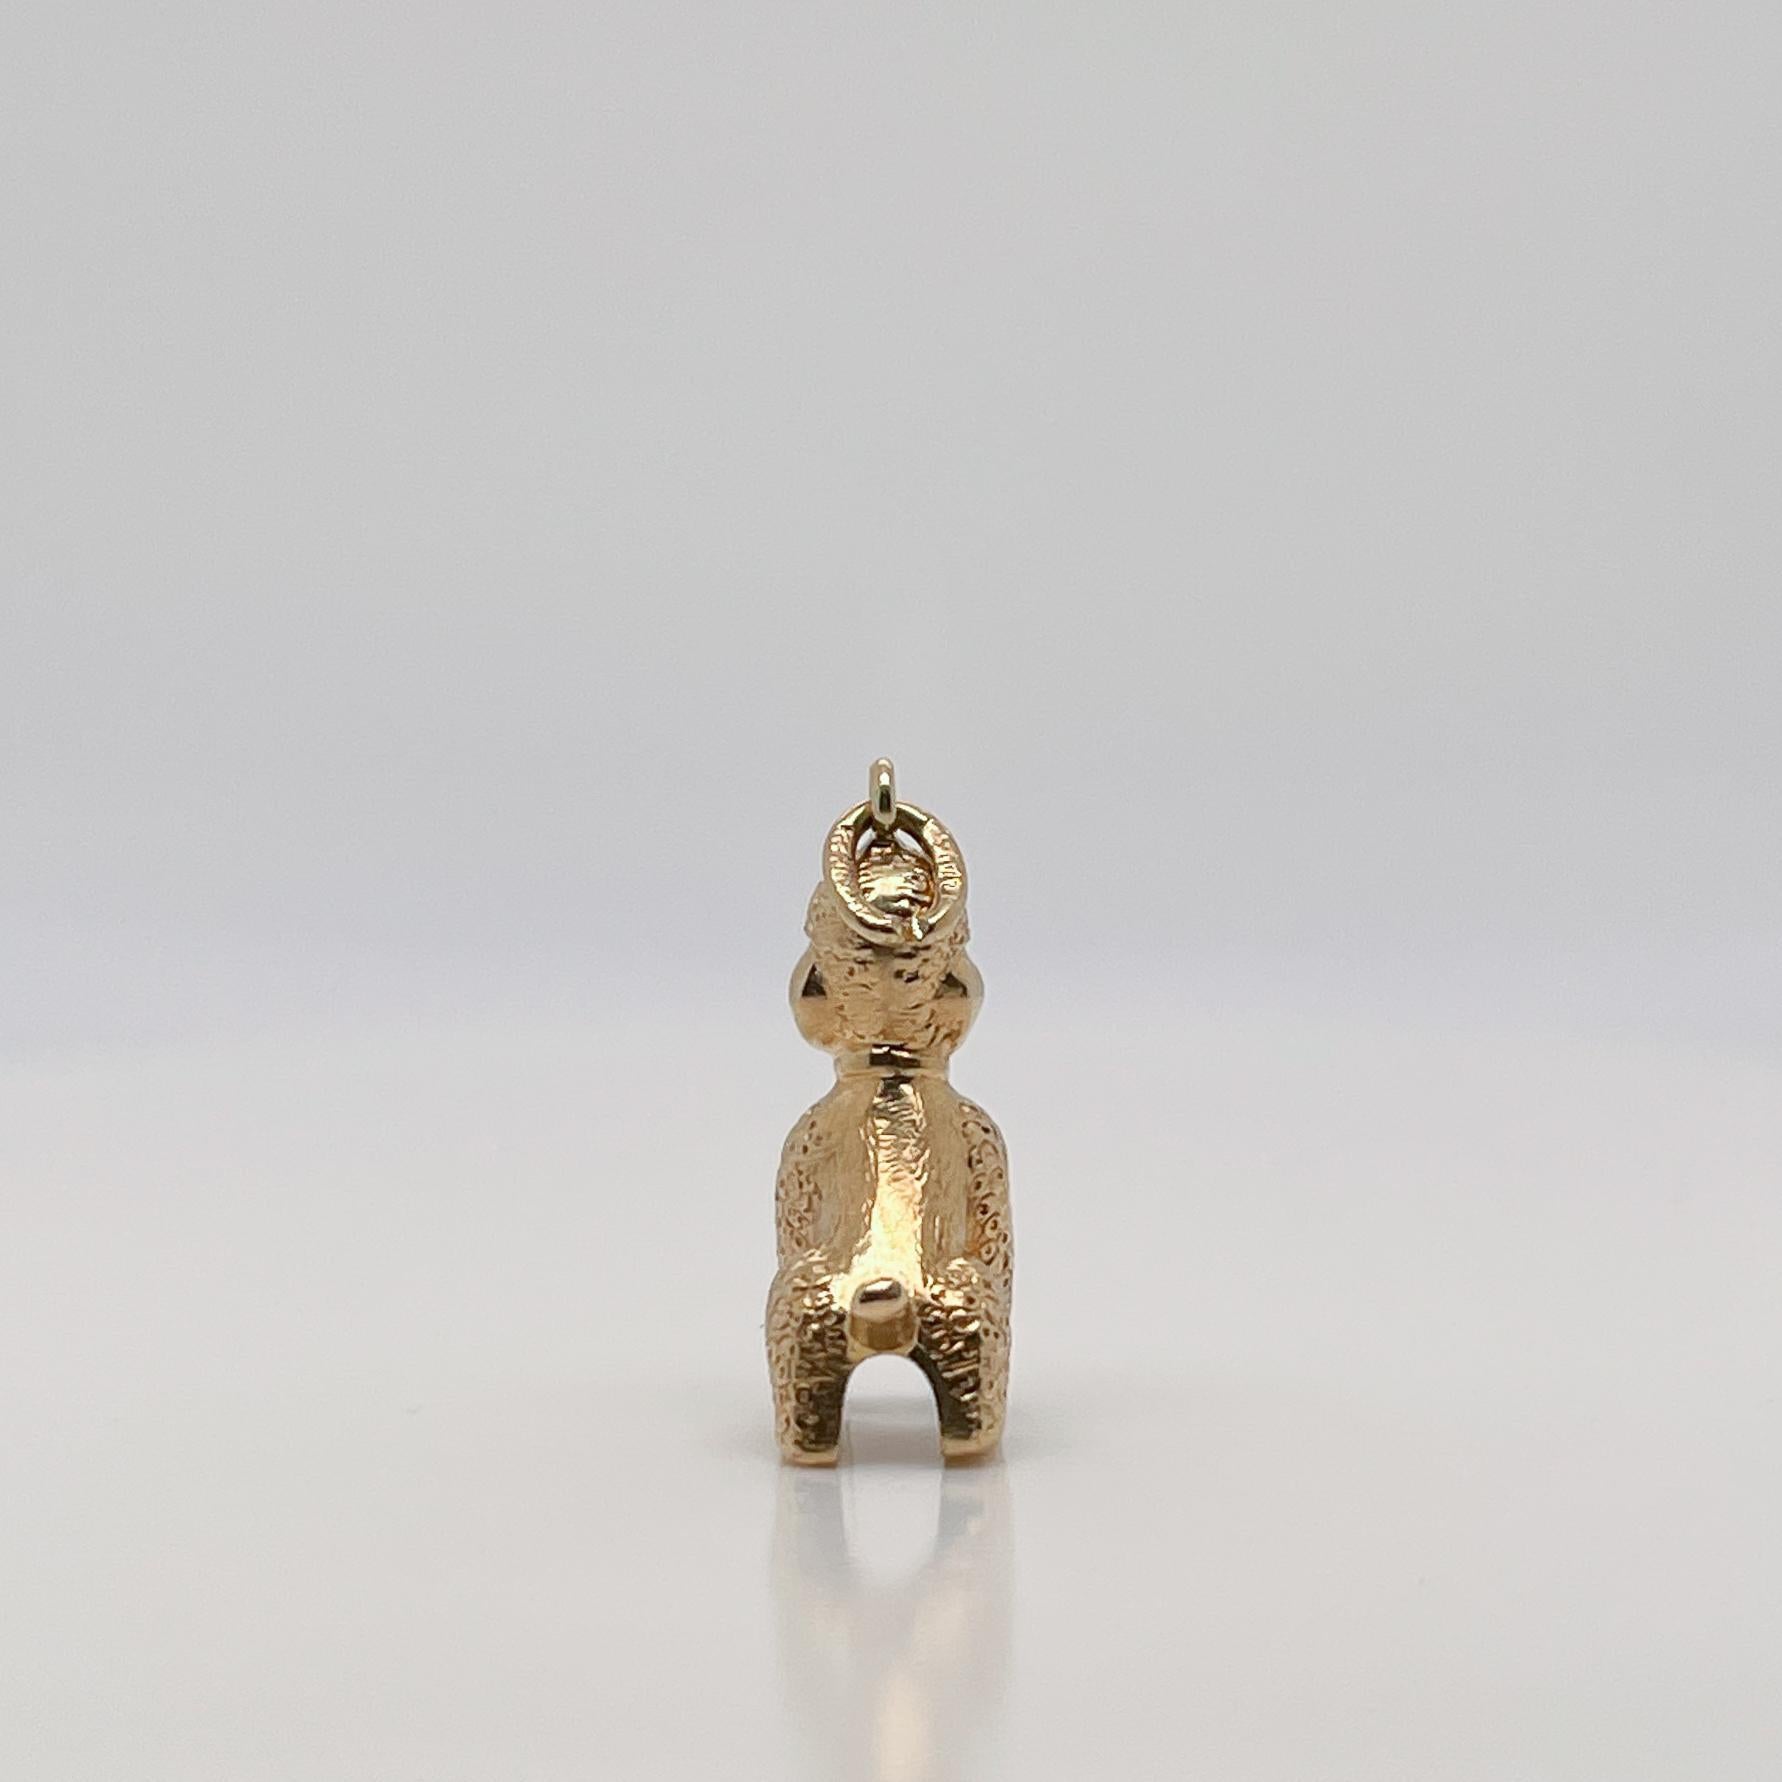 Retro Vintage 14K Gold Charm for a Bracelet of a French Poodle